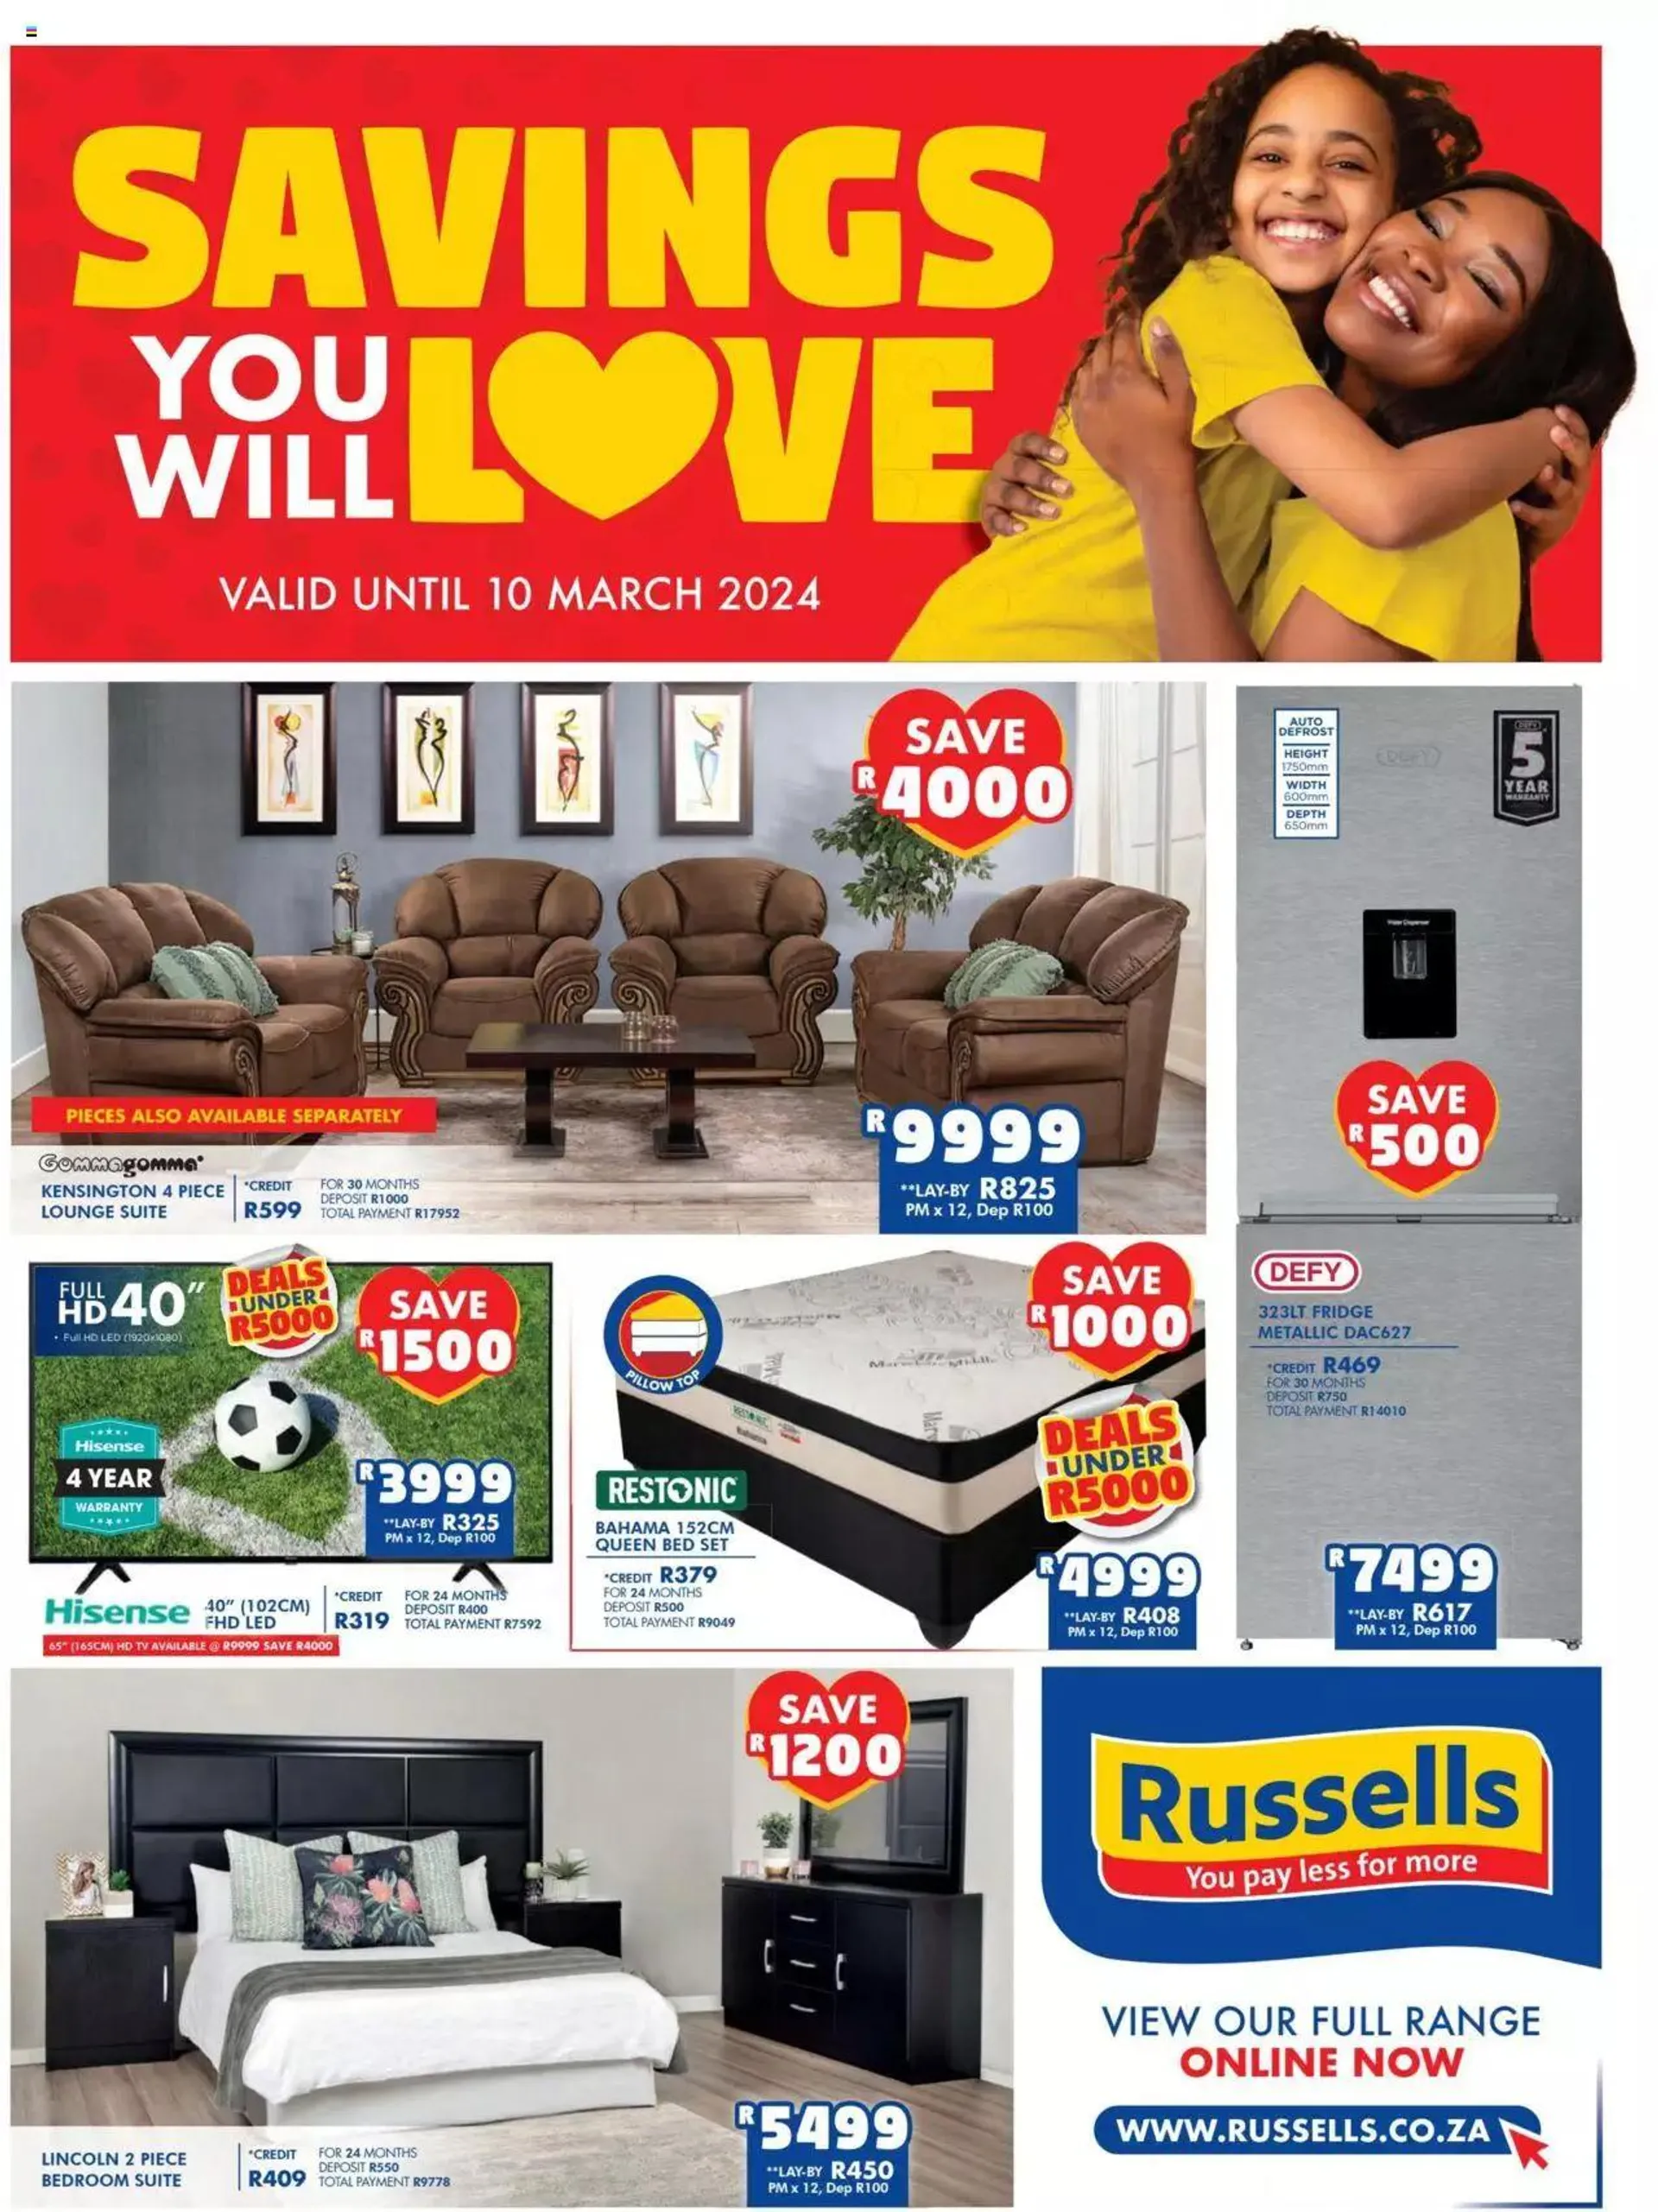 Russells - Specials - 26 February 10 March 2024